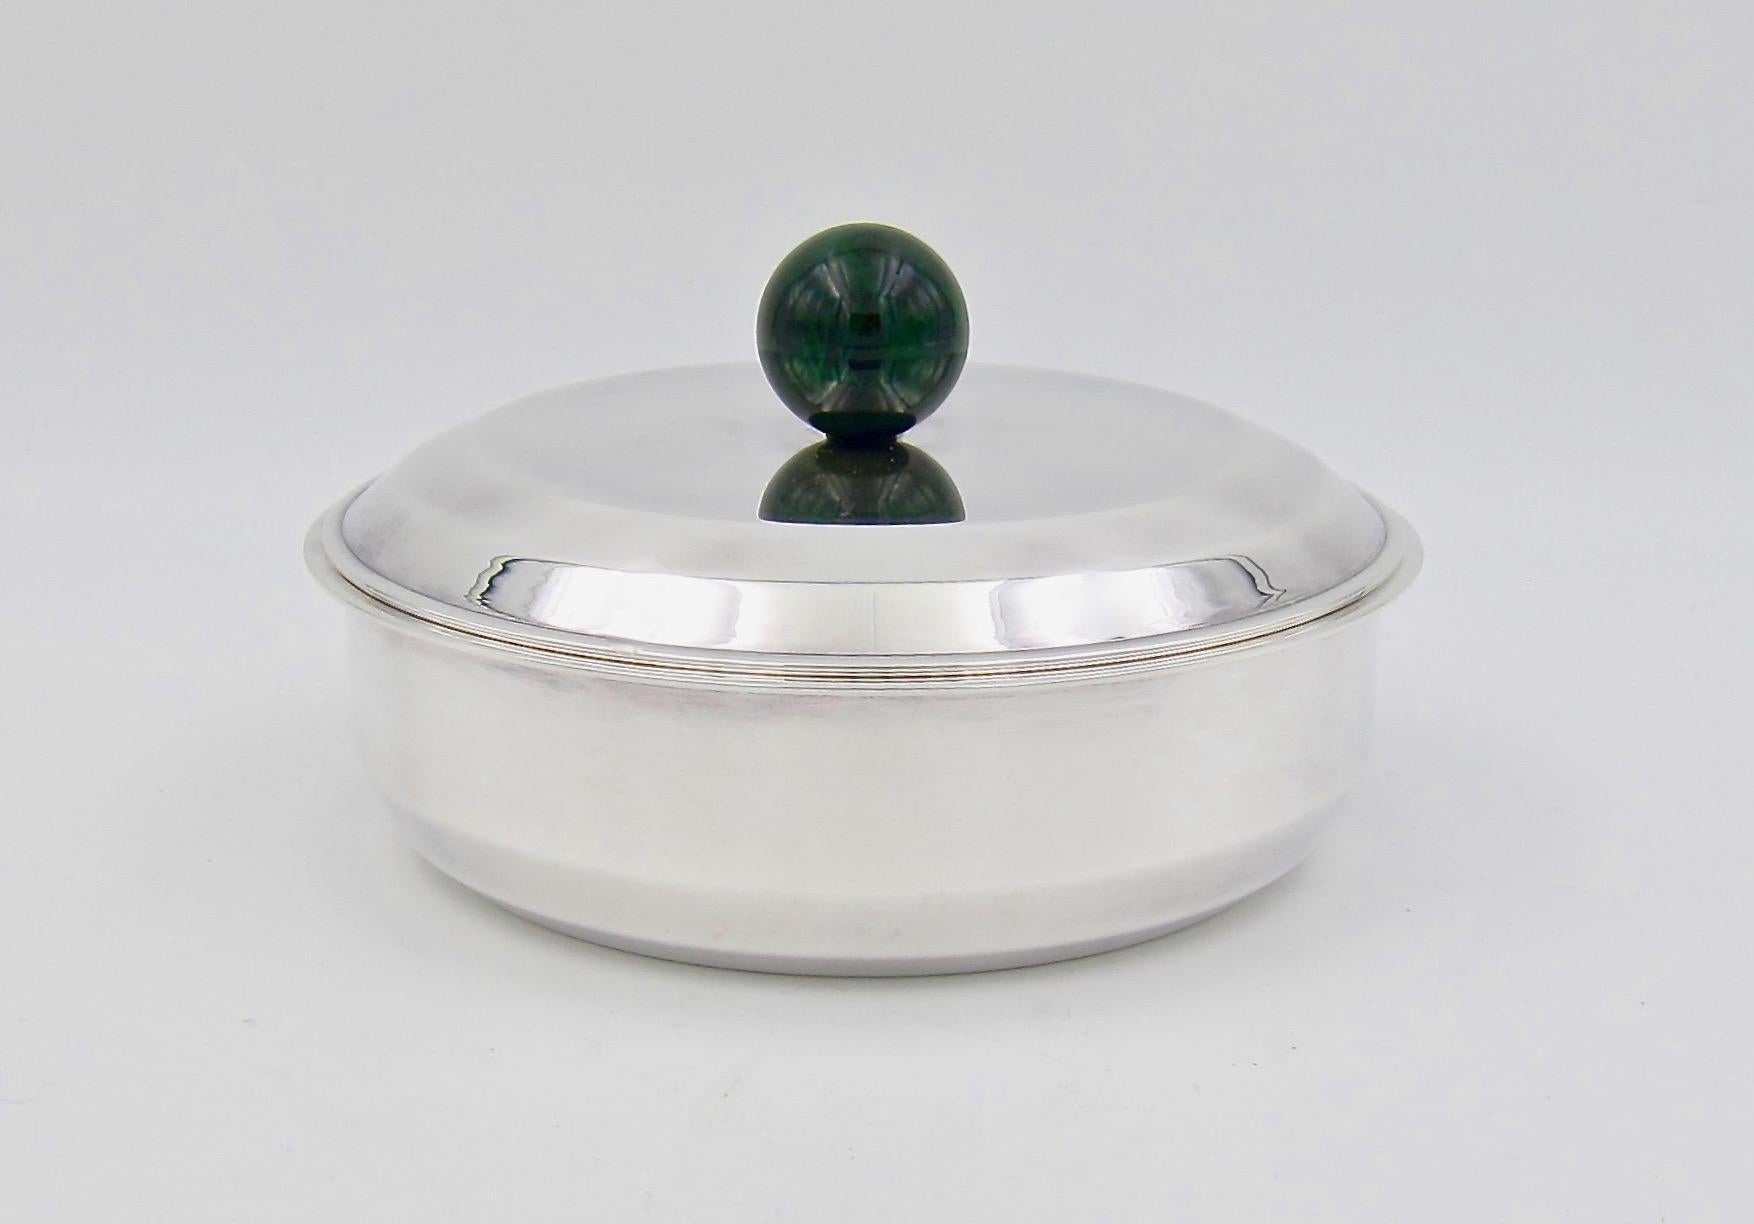 A French Art Deco bonbonnière or vanity box designed by Jean-Emile Puiforcat (1897-1945) in silver-plate with a spherical finial in veined dark green enamel, dating circa 1930s. The elegant circular covered box is an ideal accessory for a vanity,